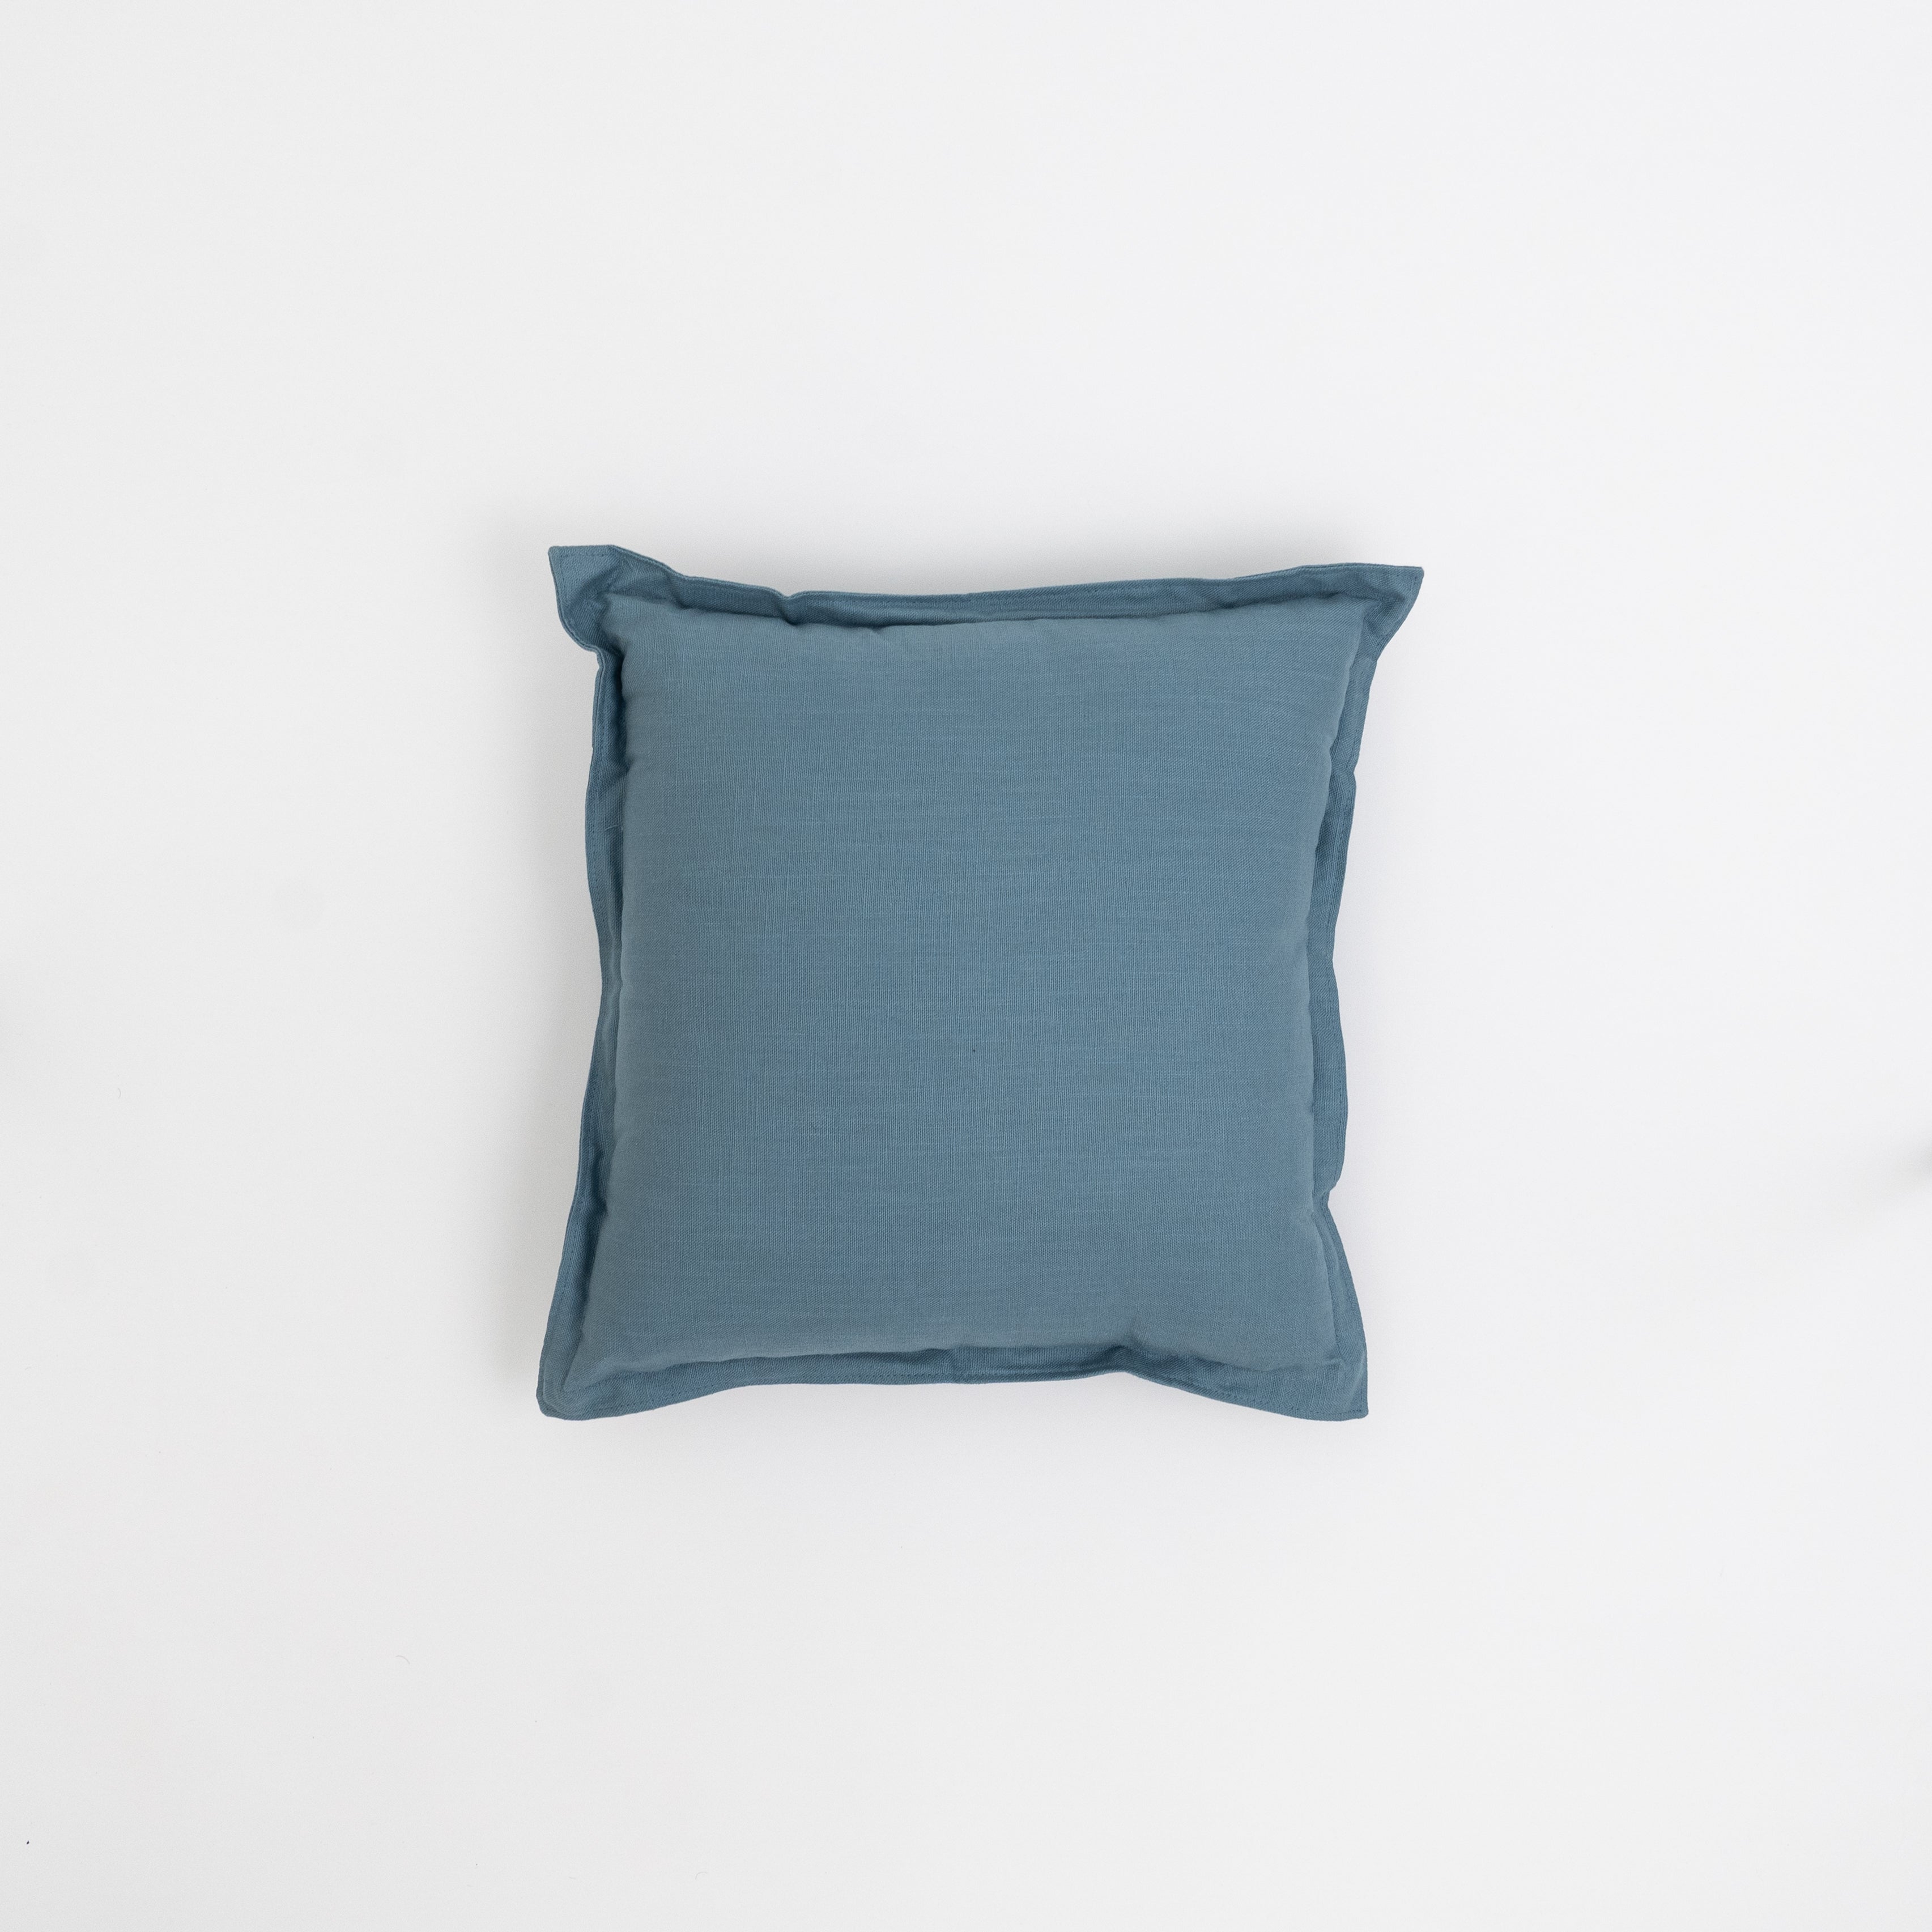 Cushion Cover 45x45cm - Wood and Steel Furnitures